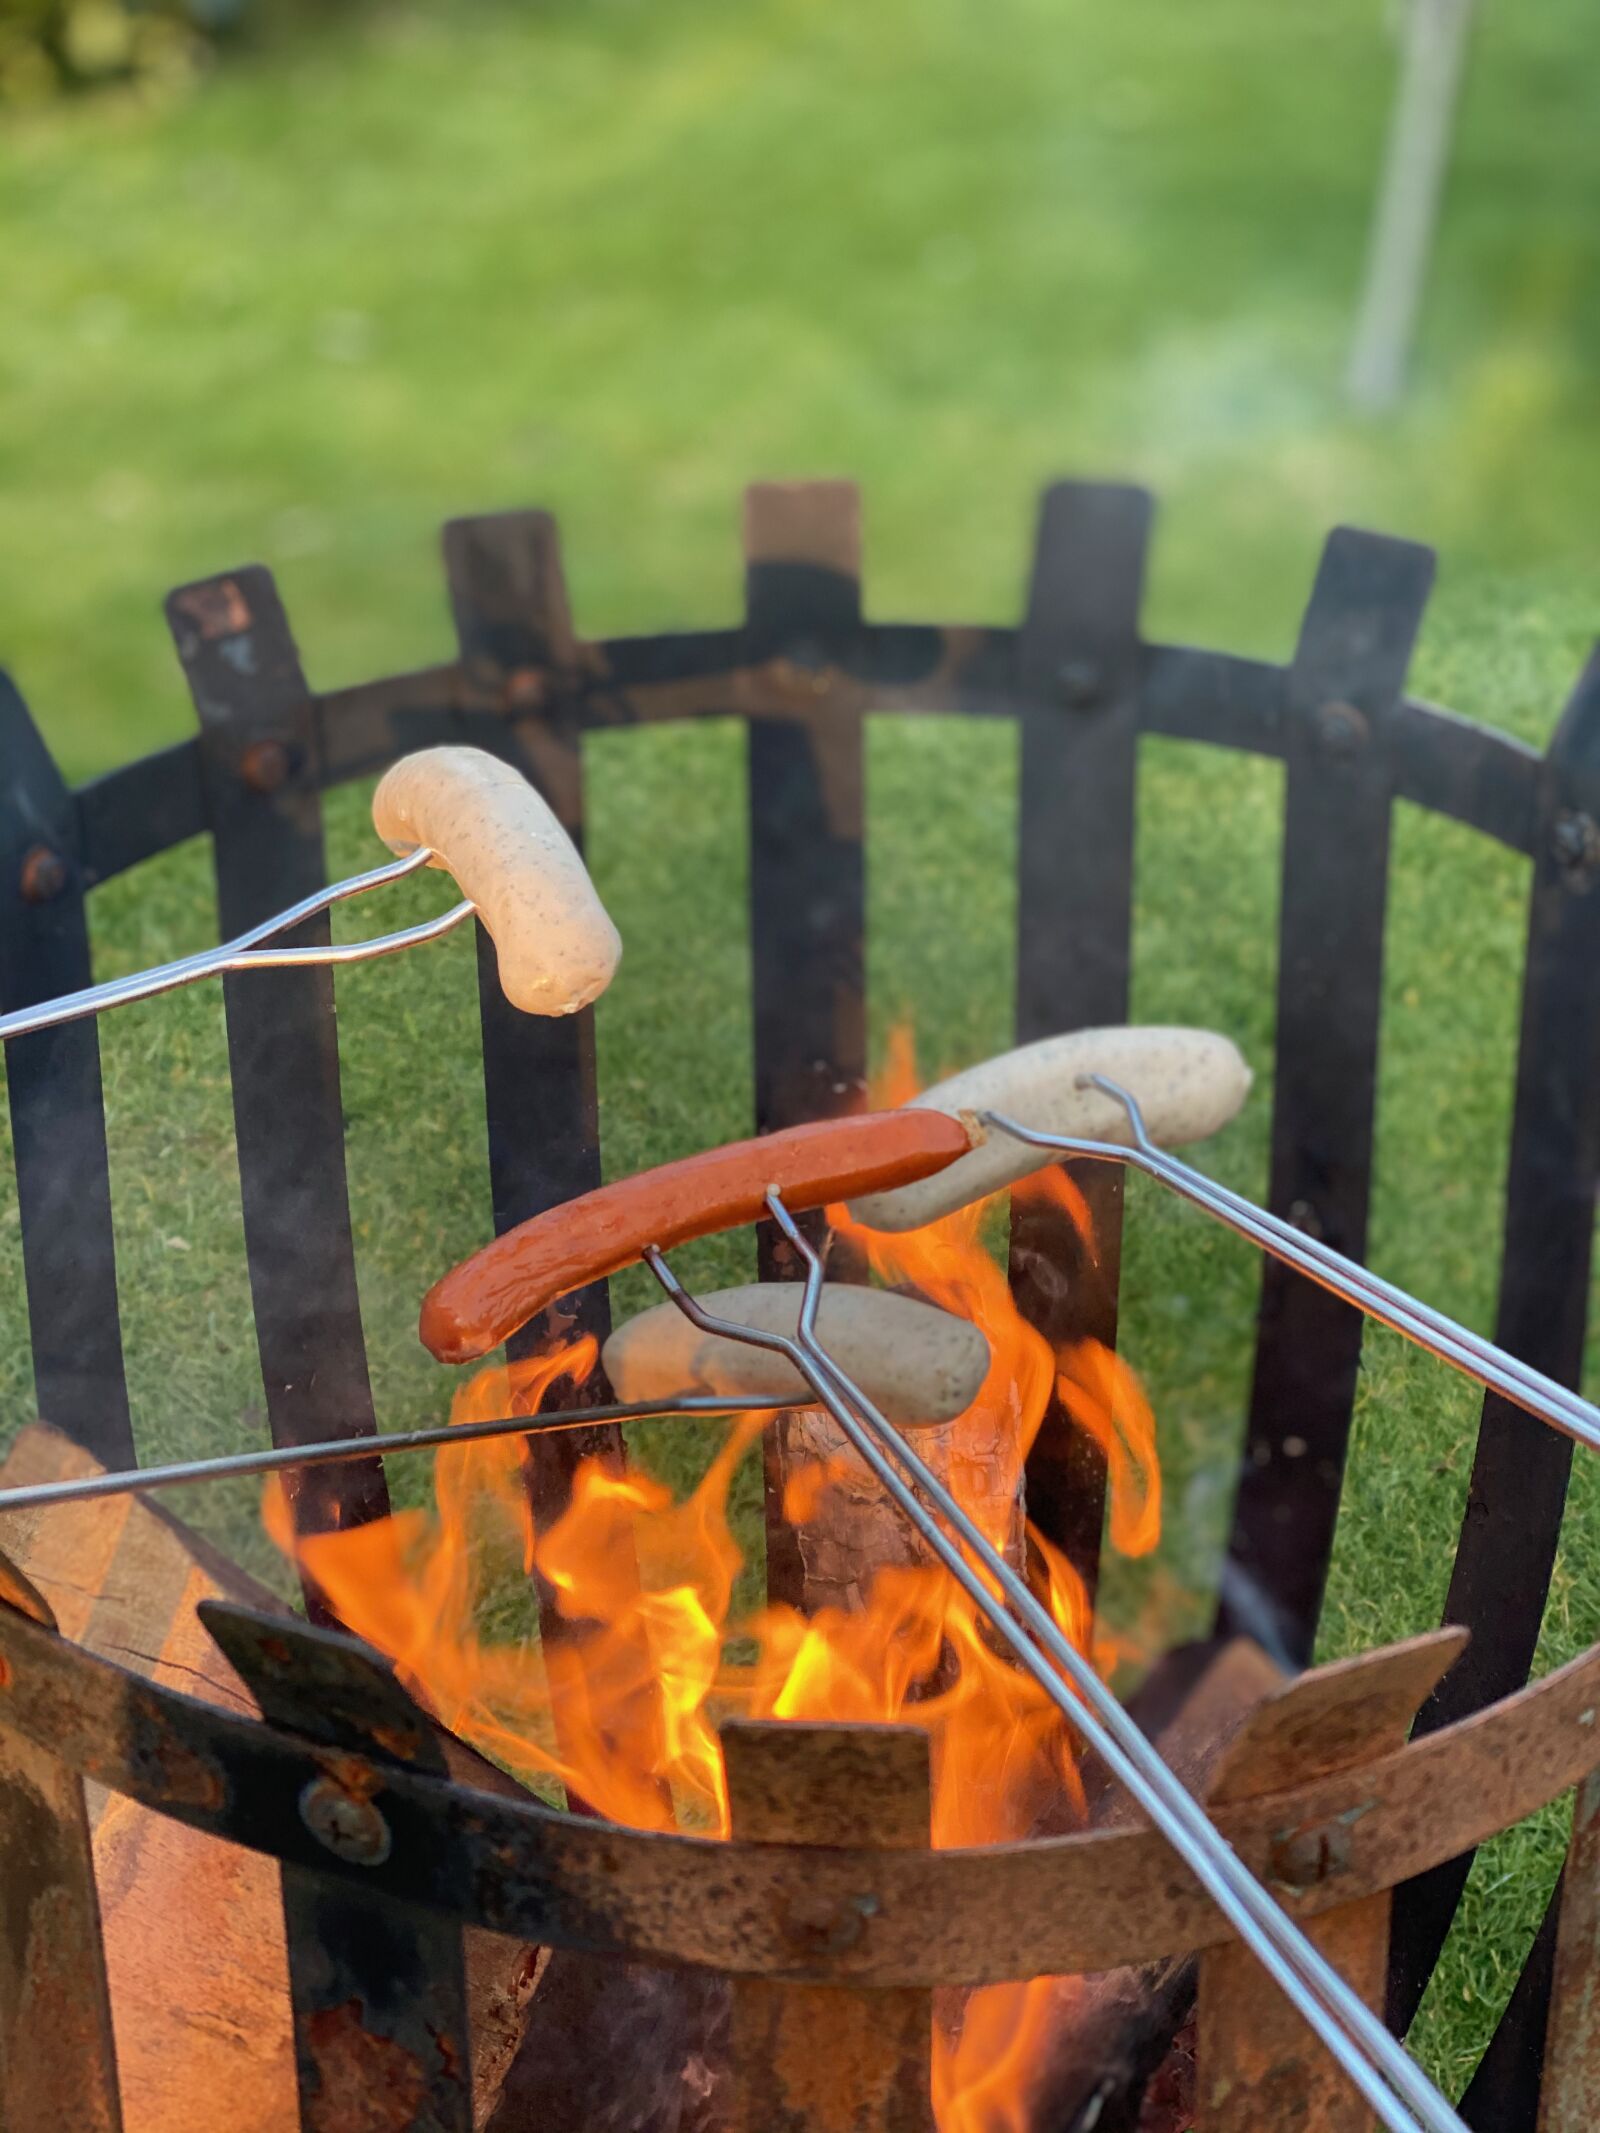 iPhone 11 Pro back dual camera 6mm f/2 sample photo. Sausage, barbecue, fire bowl photography